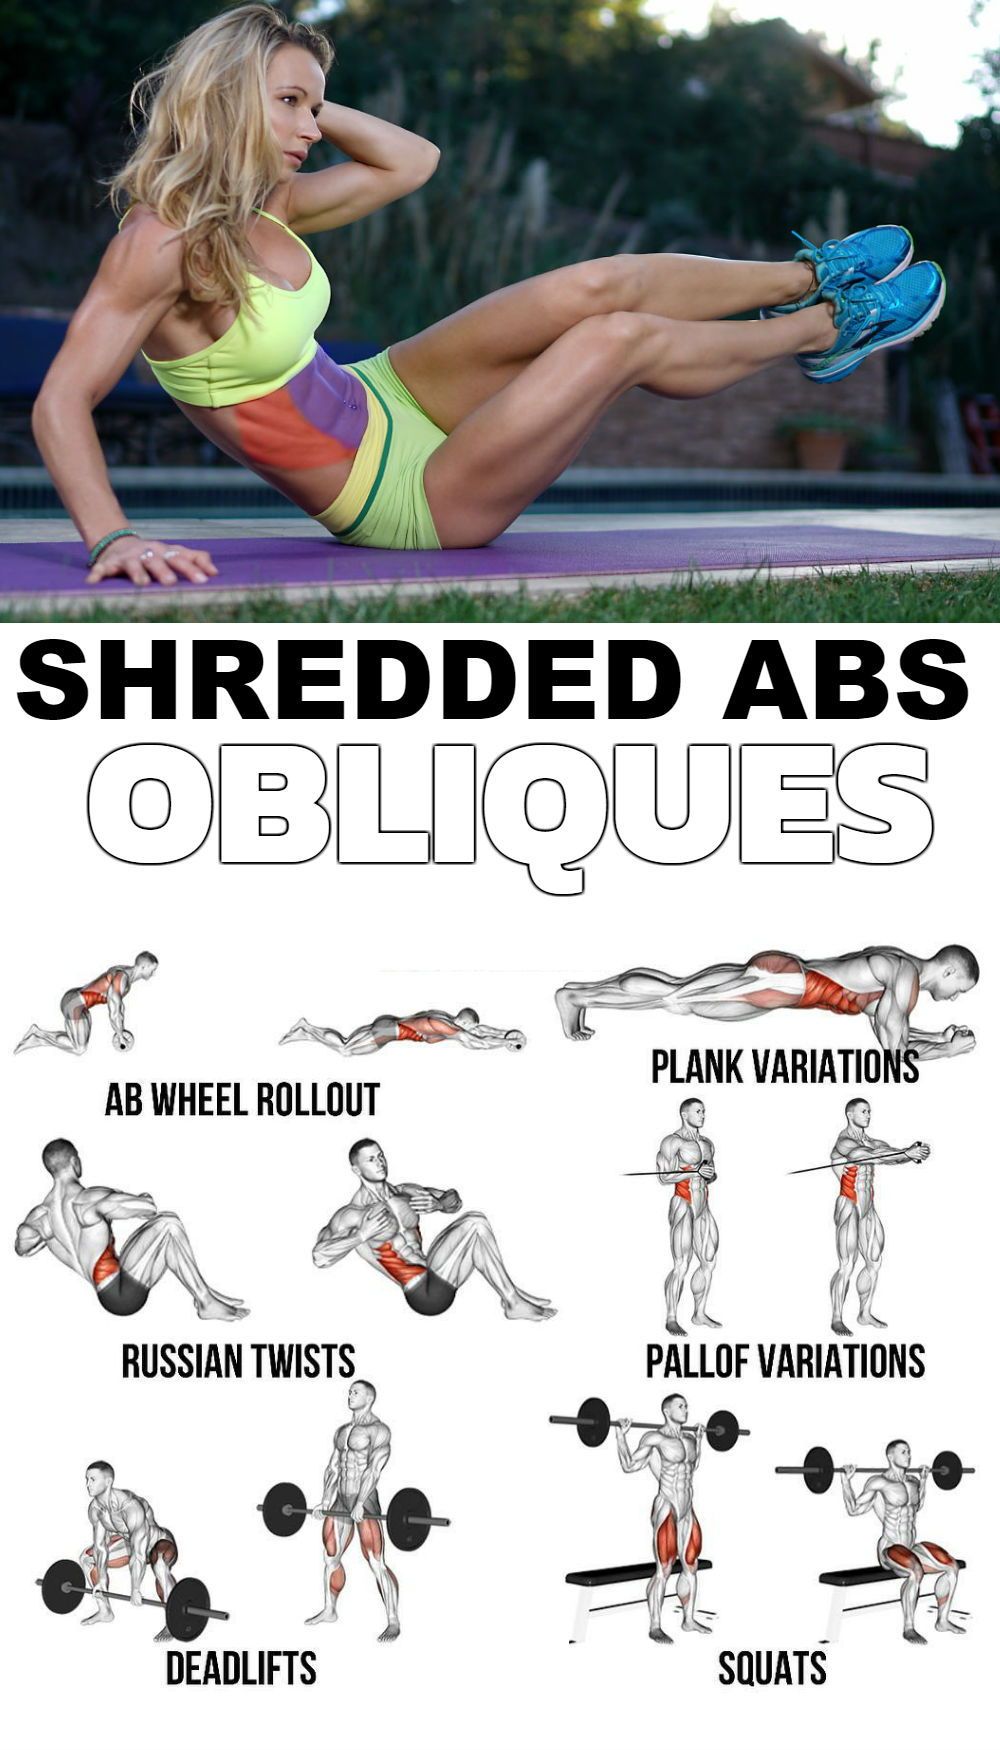 SHREDDED ABS OBLIQUES